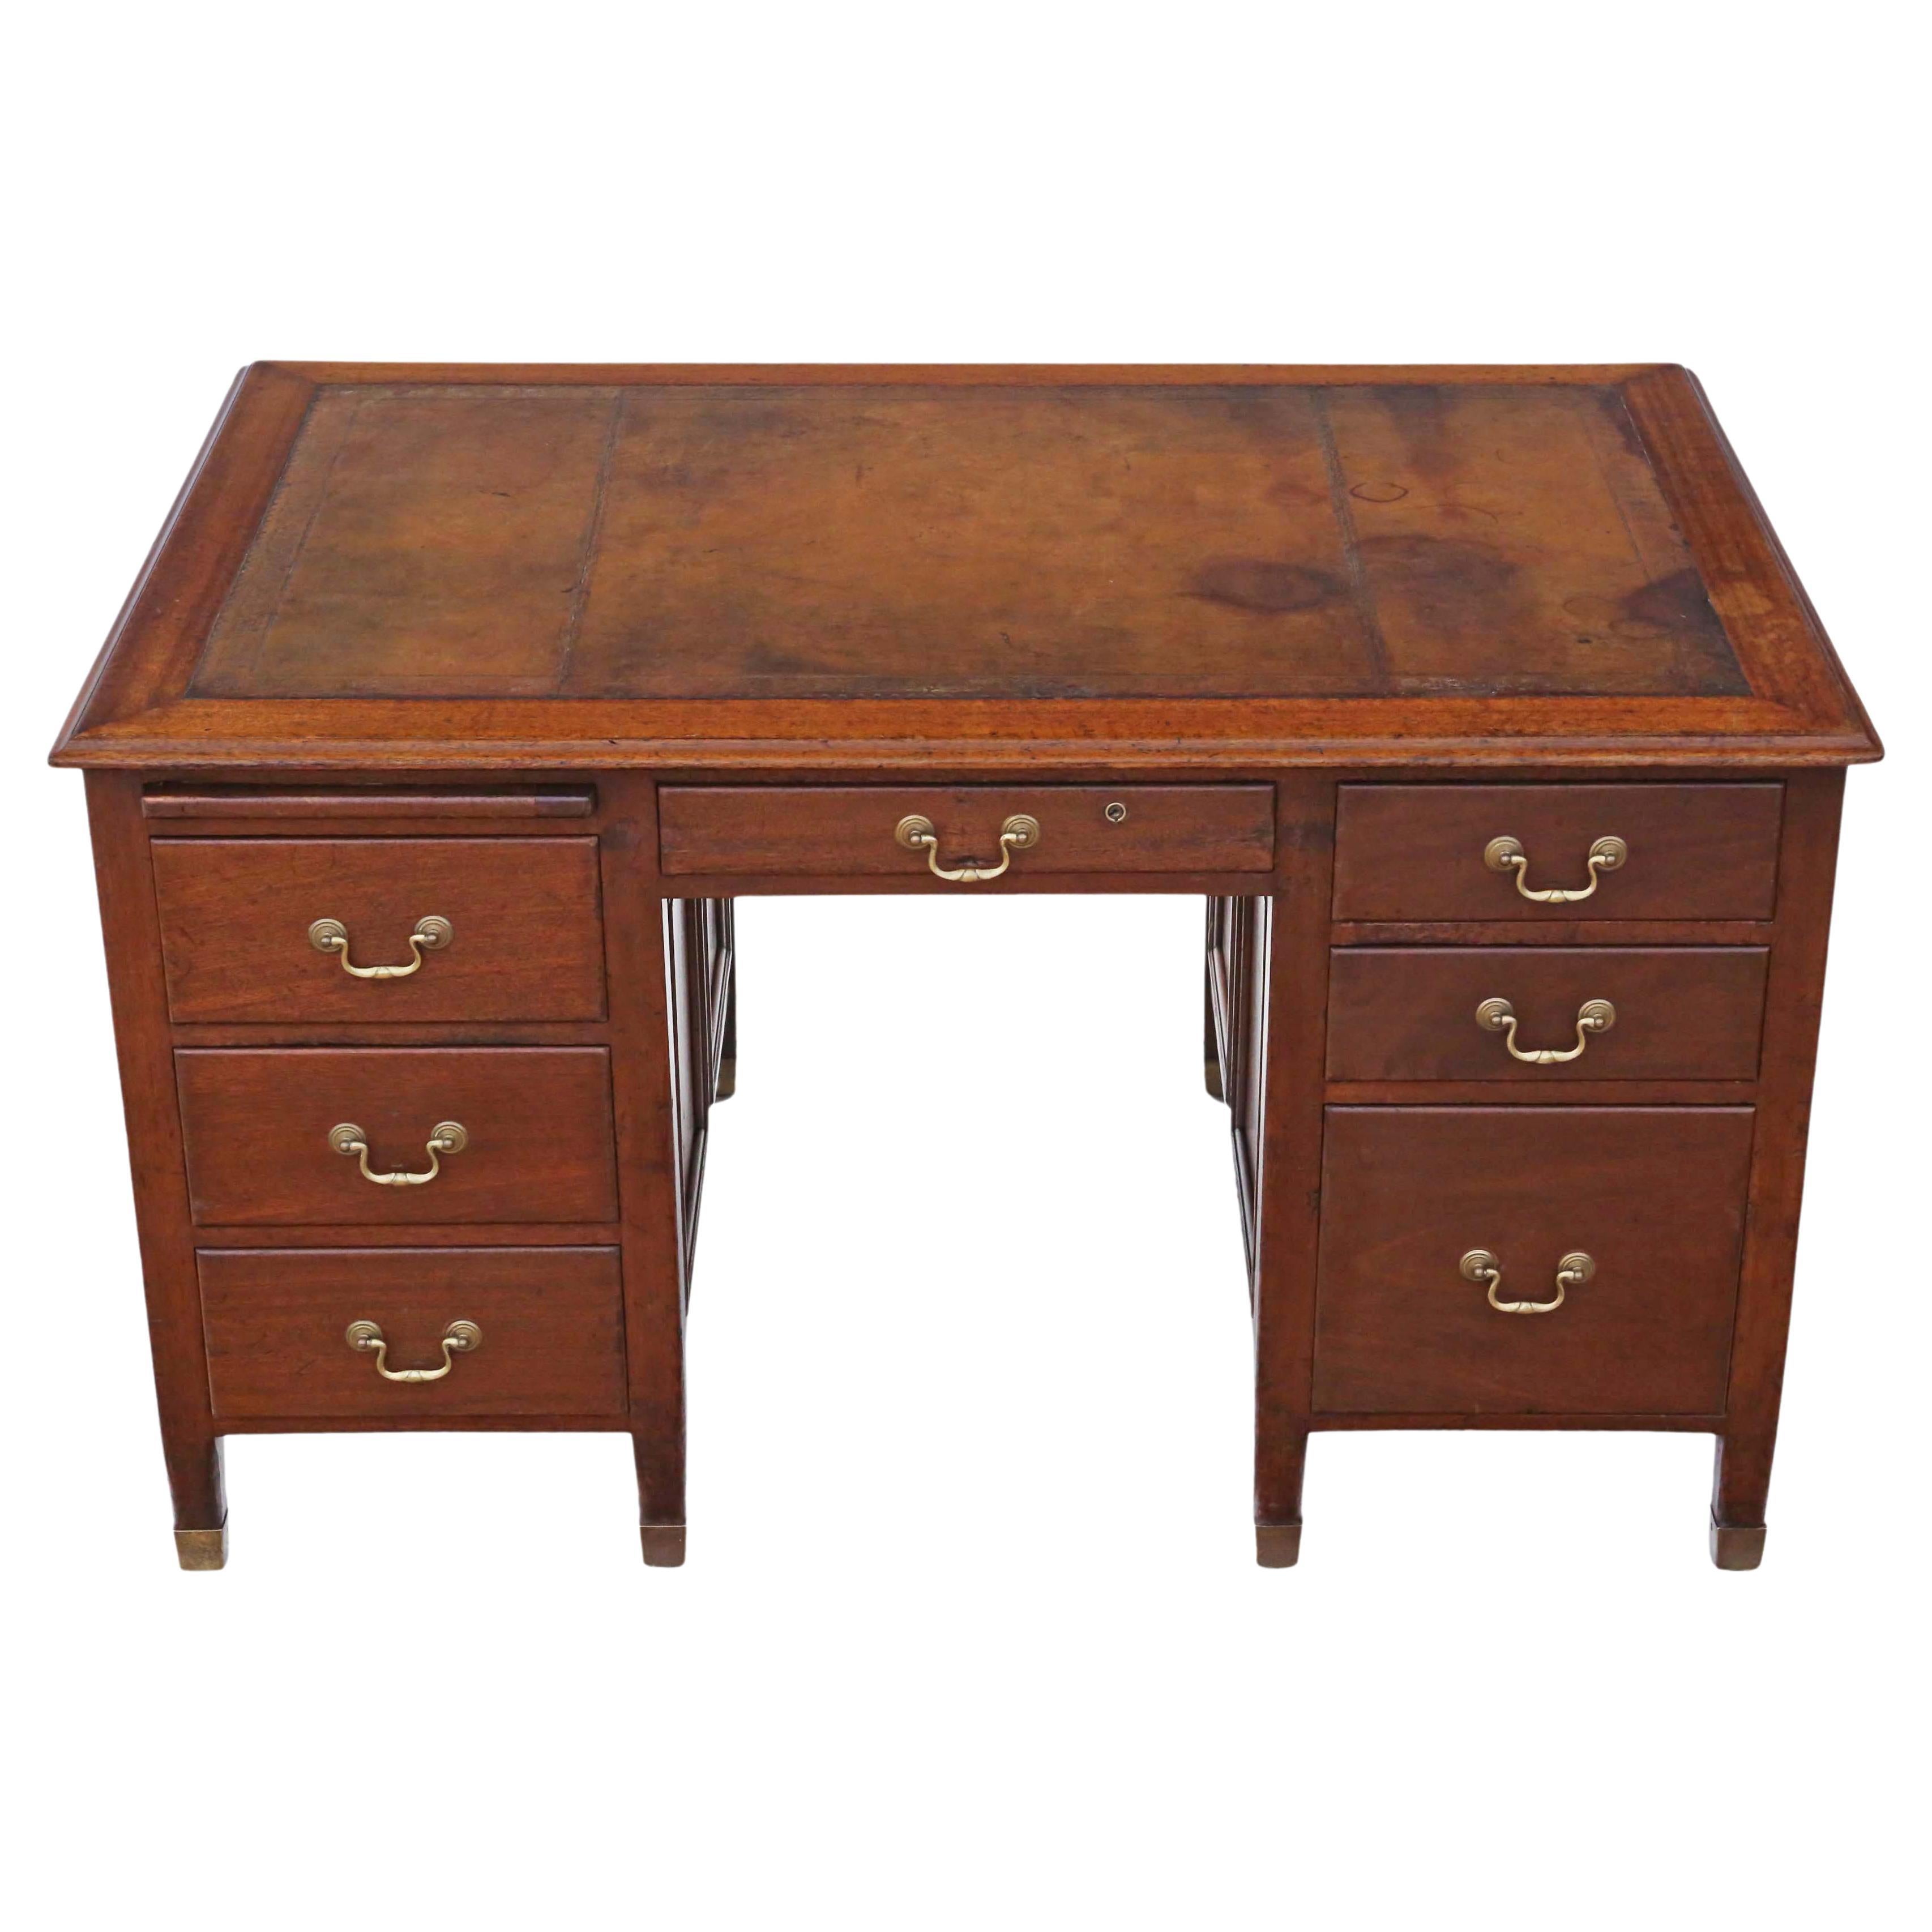 Mahogany Twin Pedestal Partner's Desk of Antique Quality from the 1920s For Sale